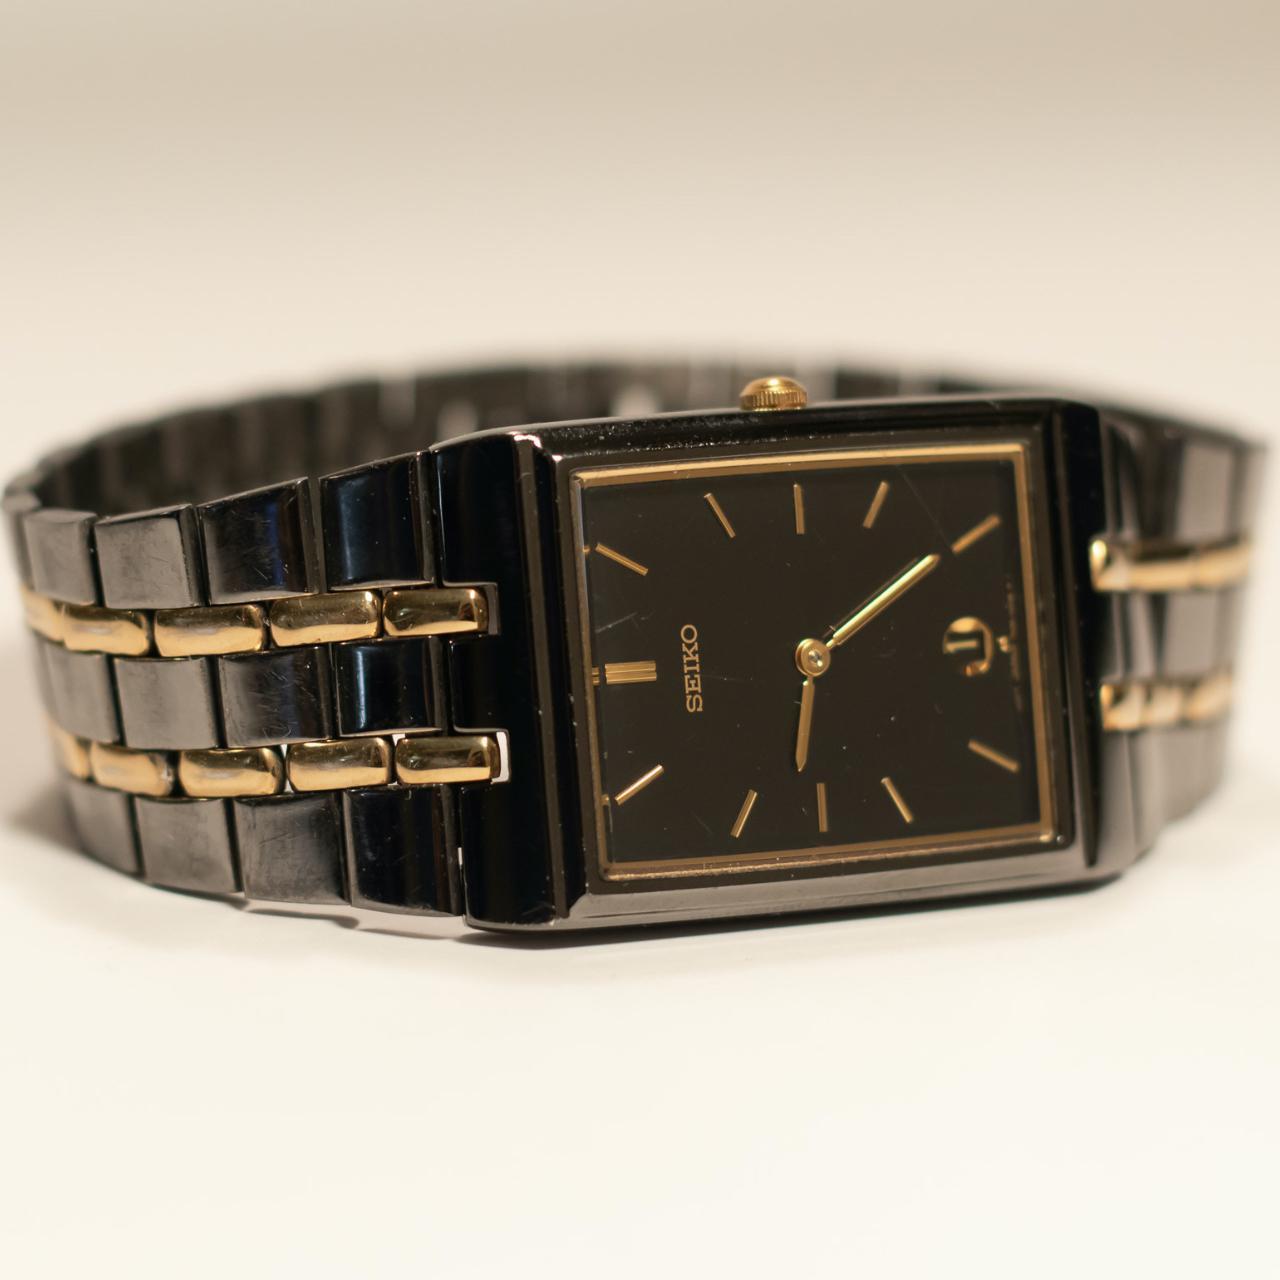 Seiko Men's Black and Gold Watch